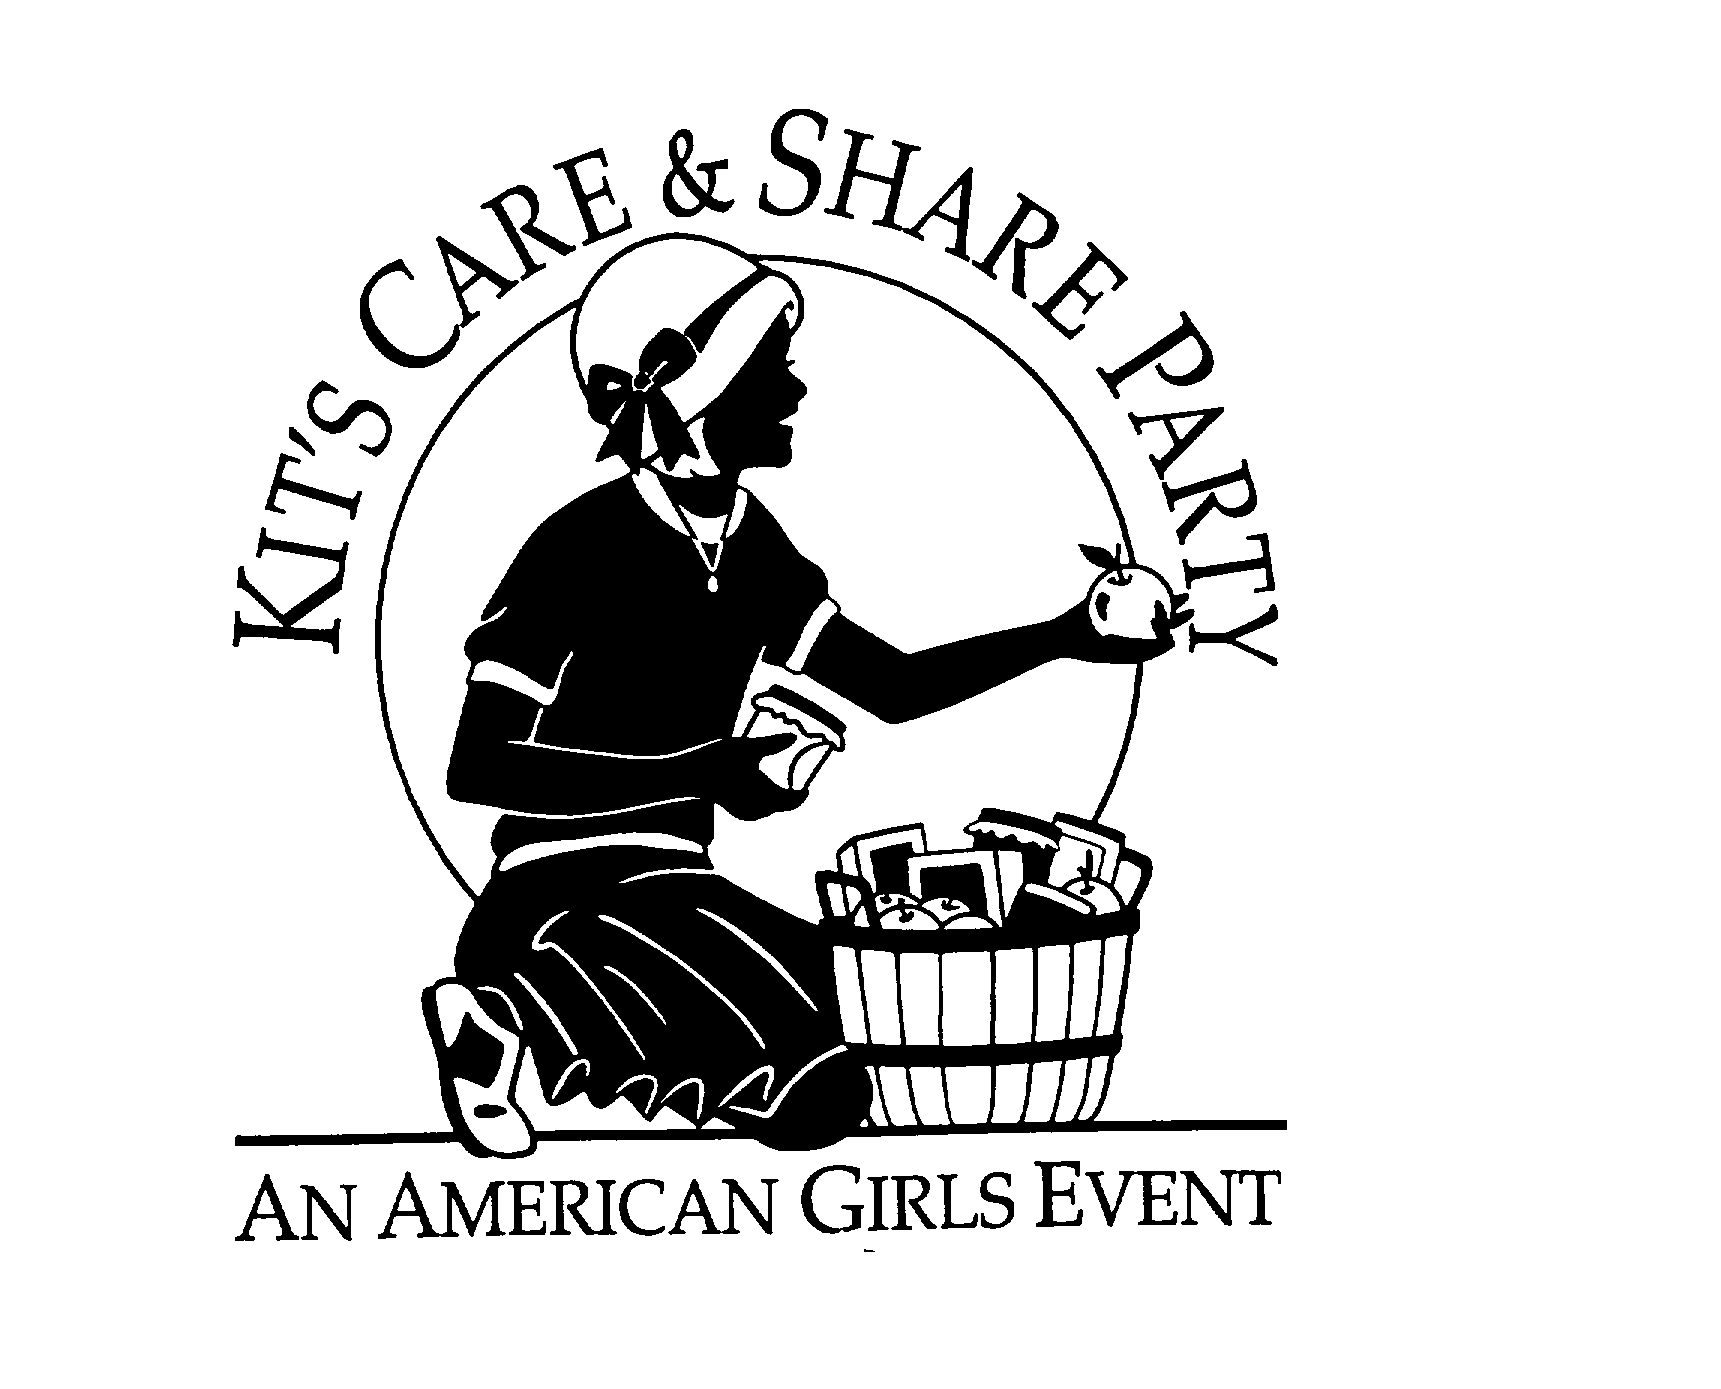  KIT'S CARE &amp; SHARE PARTY AN AMERICAN GIRLS EVENT